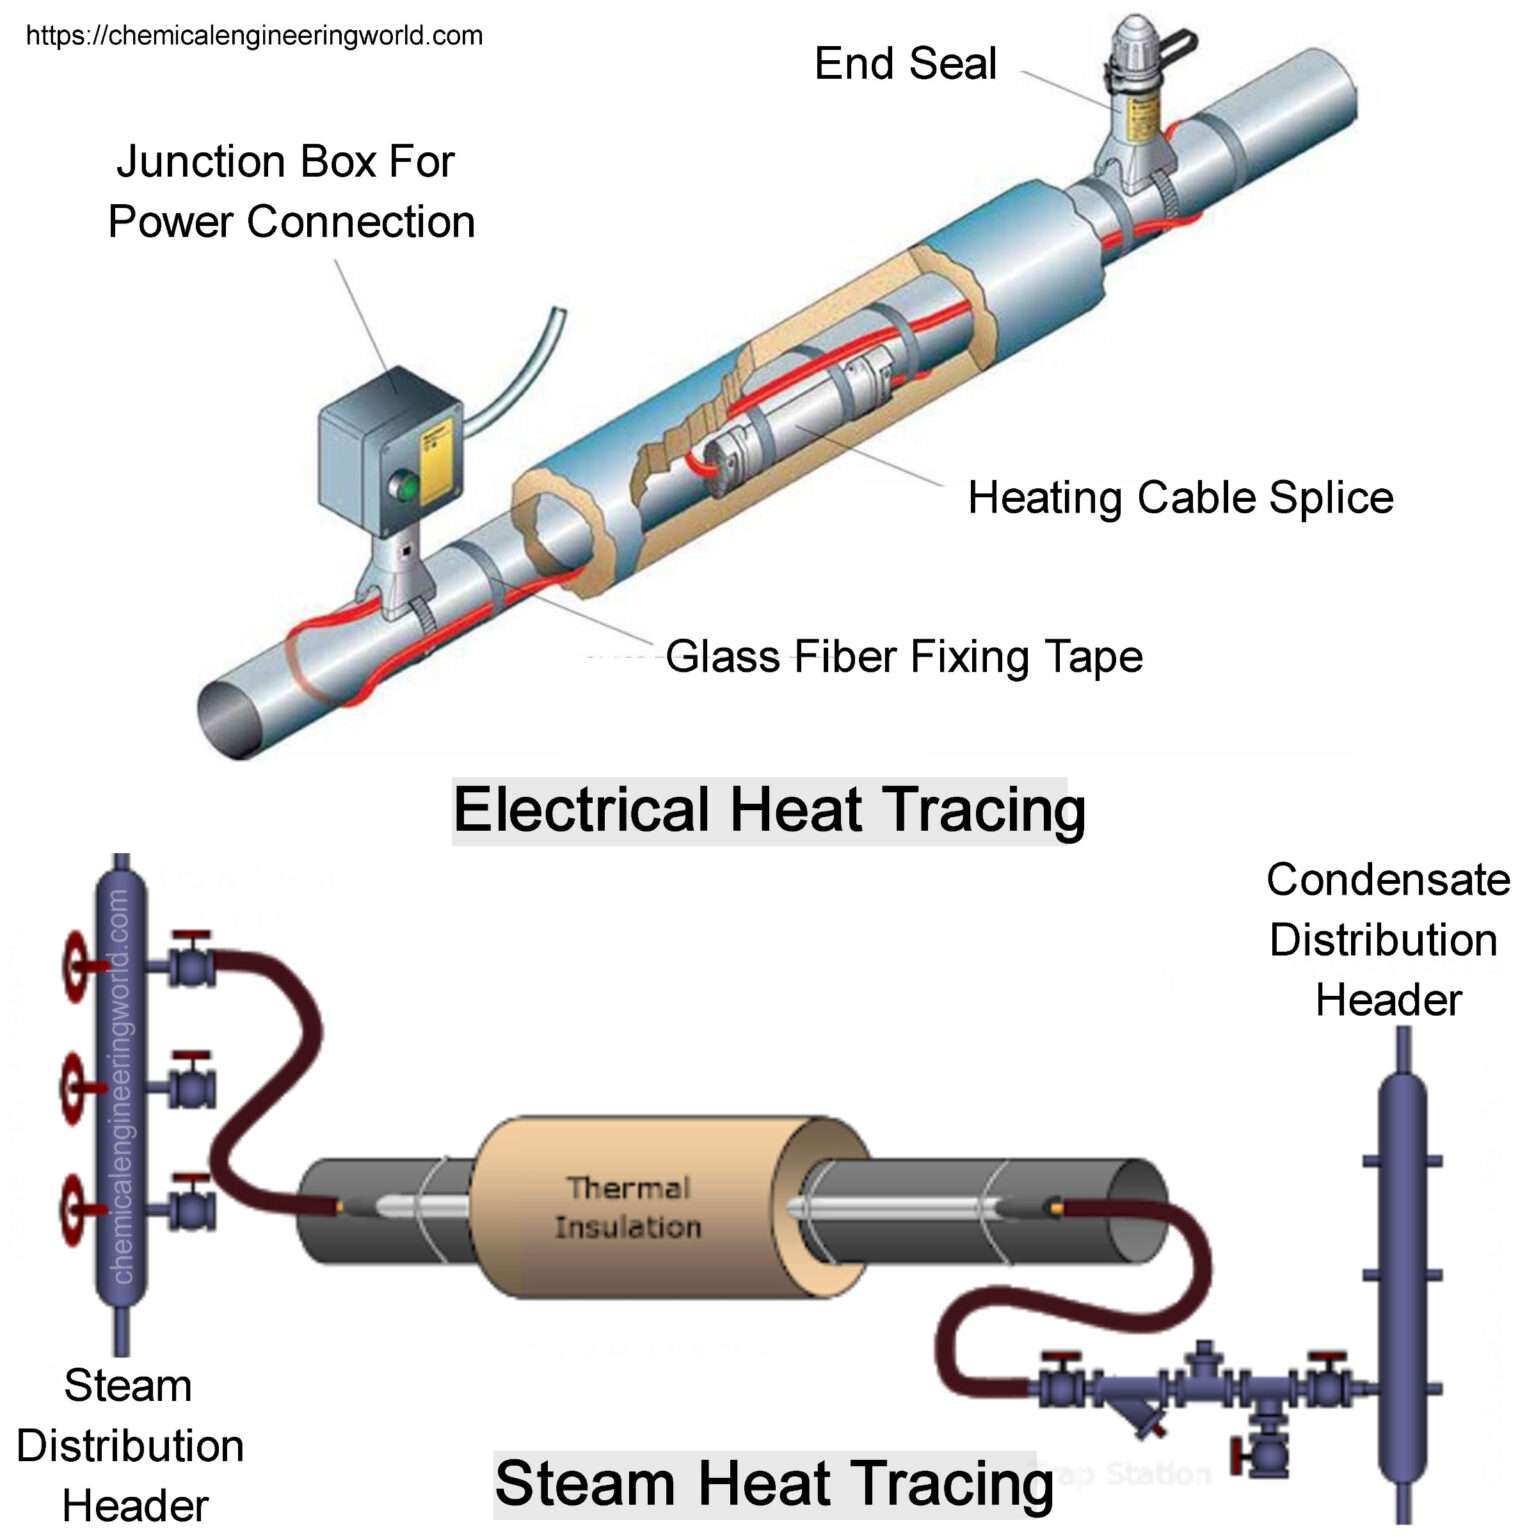 Heat Tracing on Pipeline Chemical Engineering World